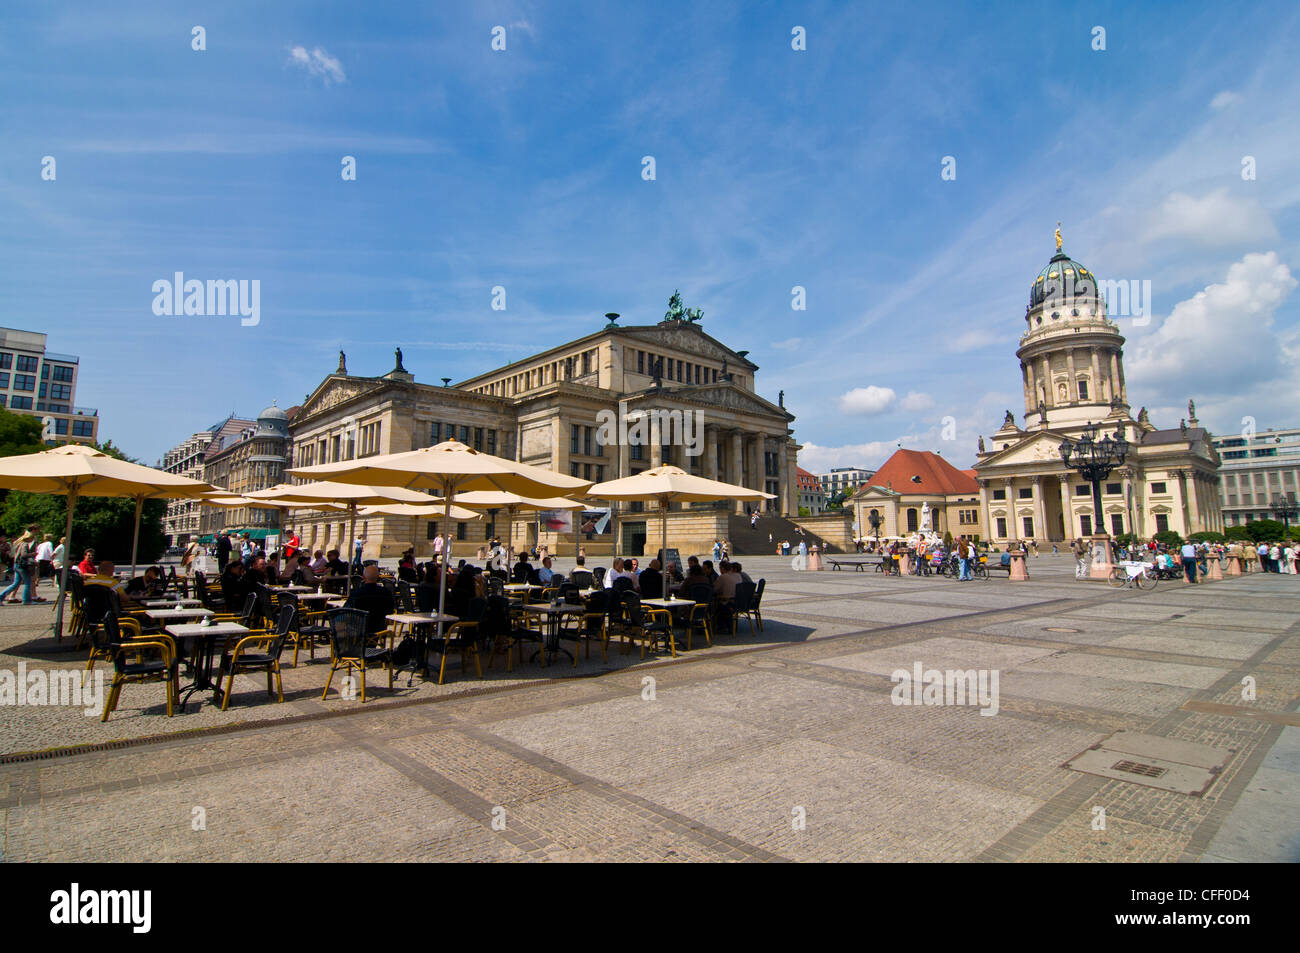 The Berlin Gendarmenmarkt site of the Konzerthaus and the French and German Cathedrals, Berlin, Germany, Europe Stock Photo